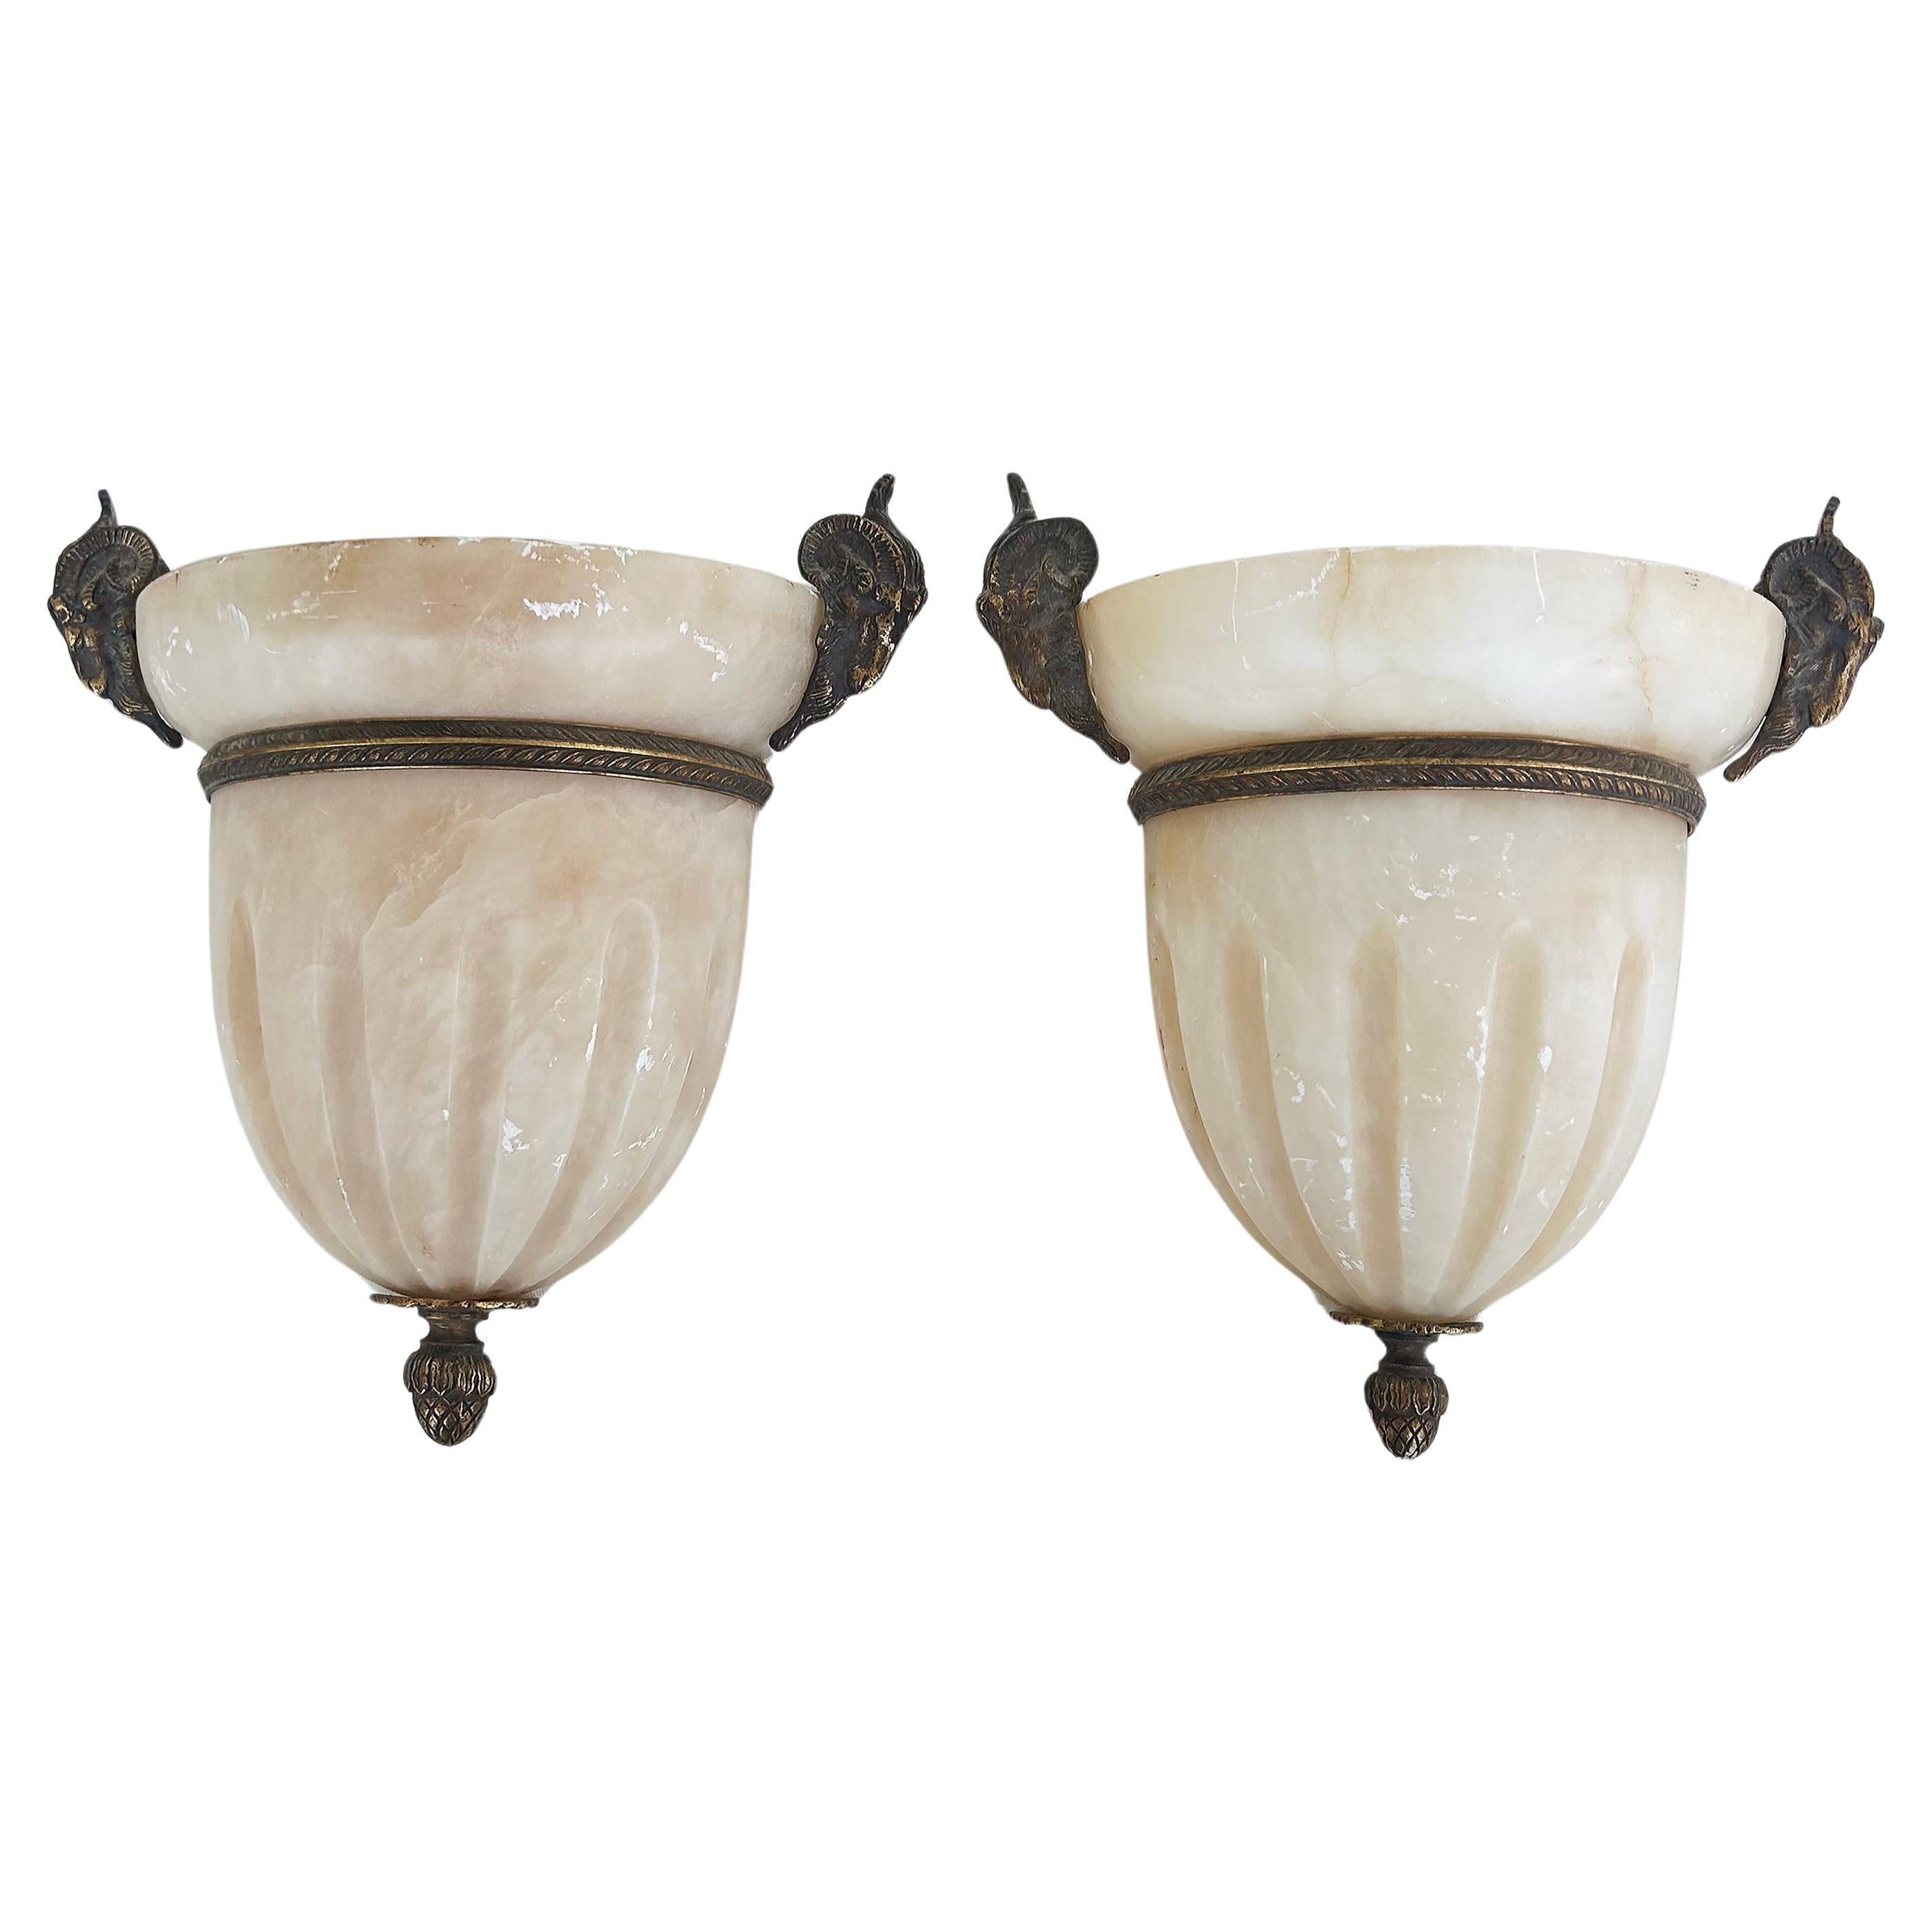 Alabaster Gilt Bronze Ram's Head Wall Sconces by Mariner, S.A., Spain, Pair